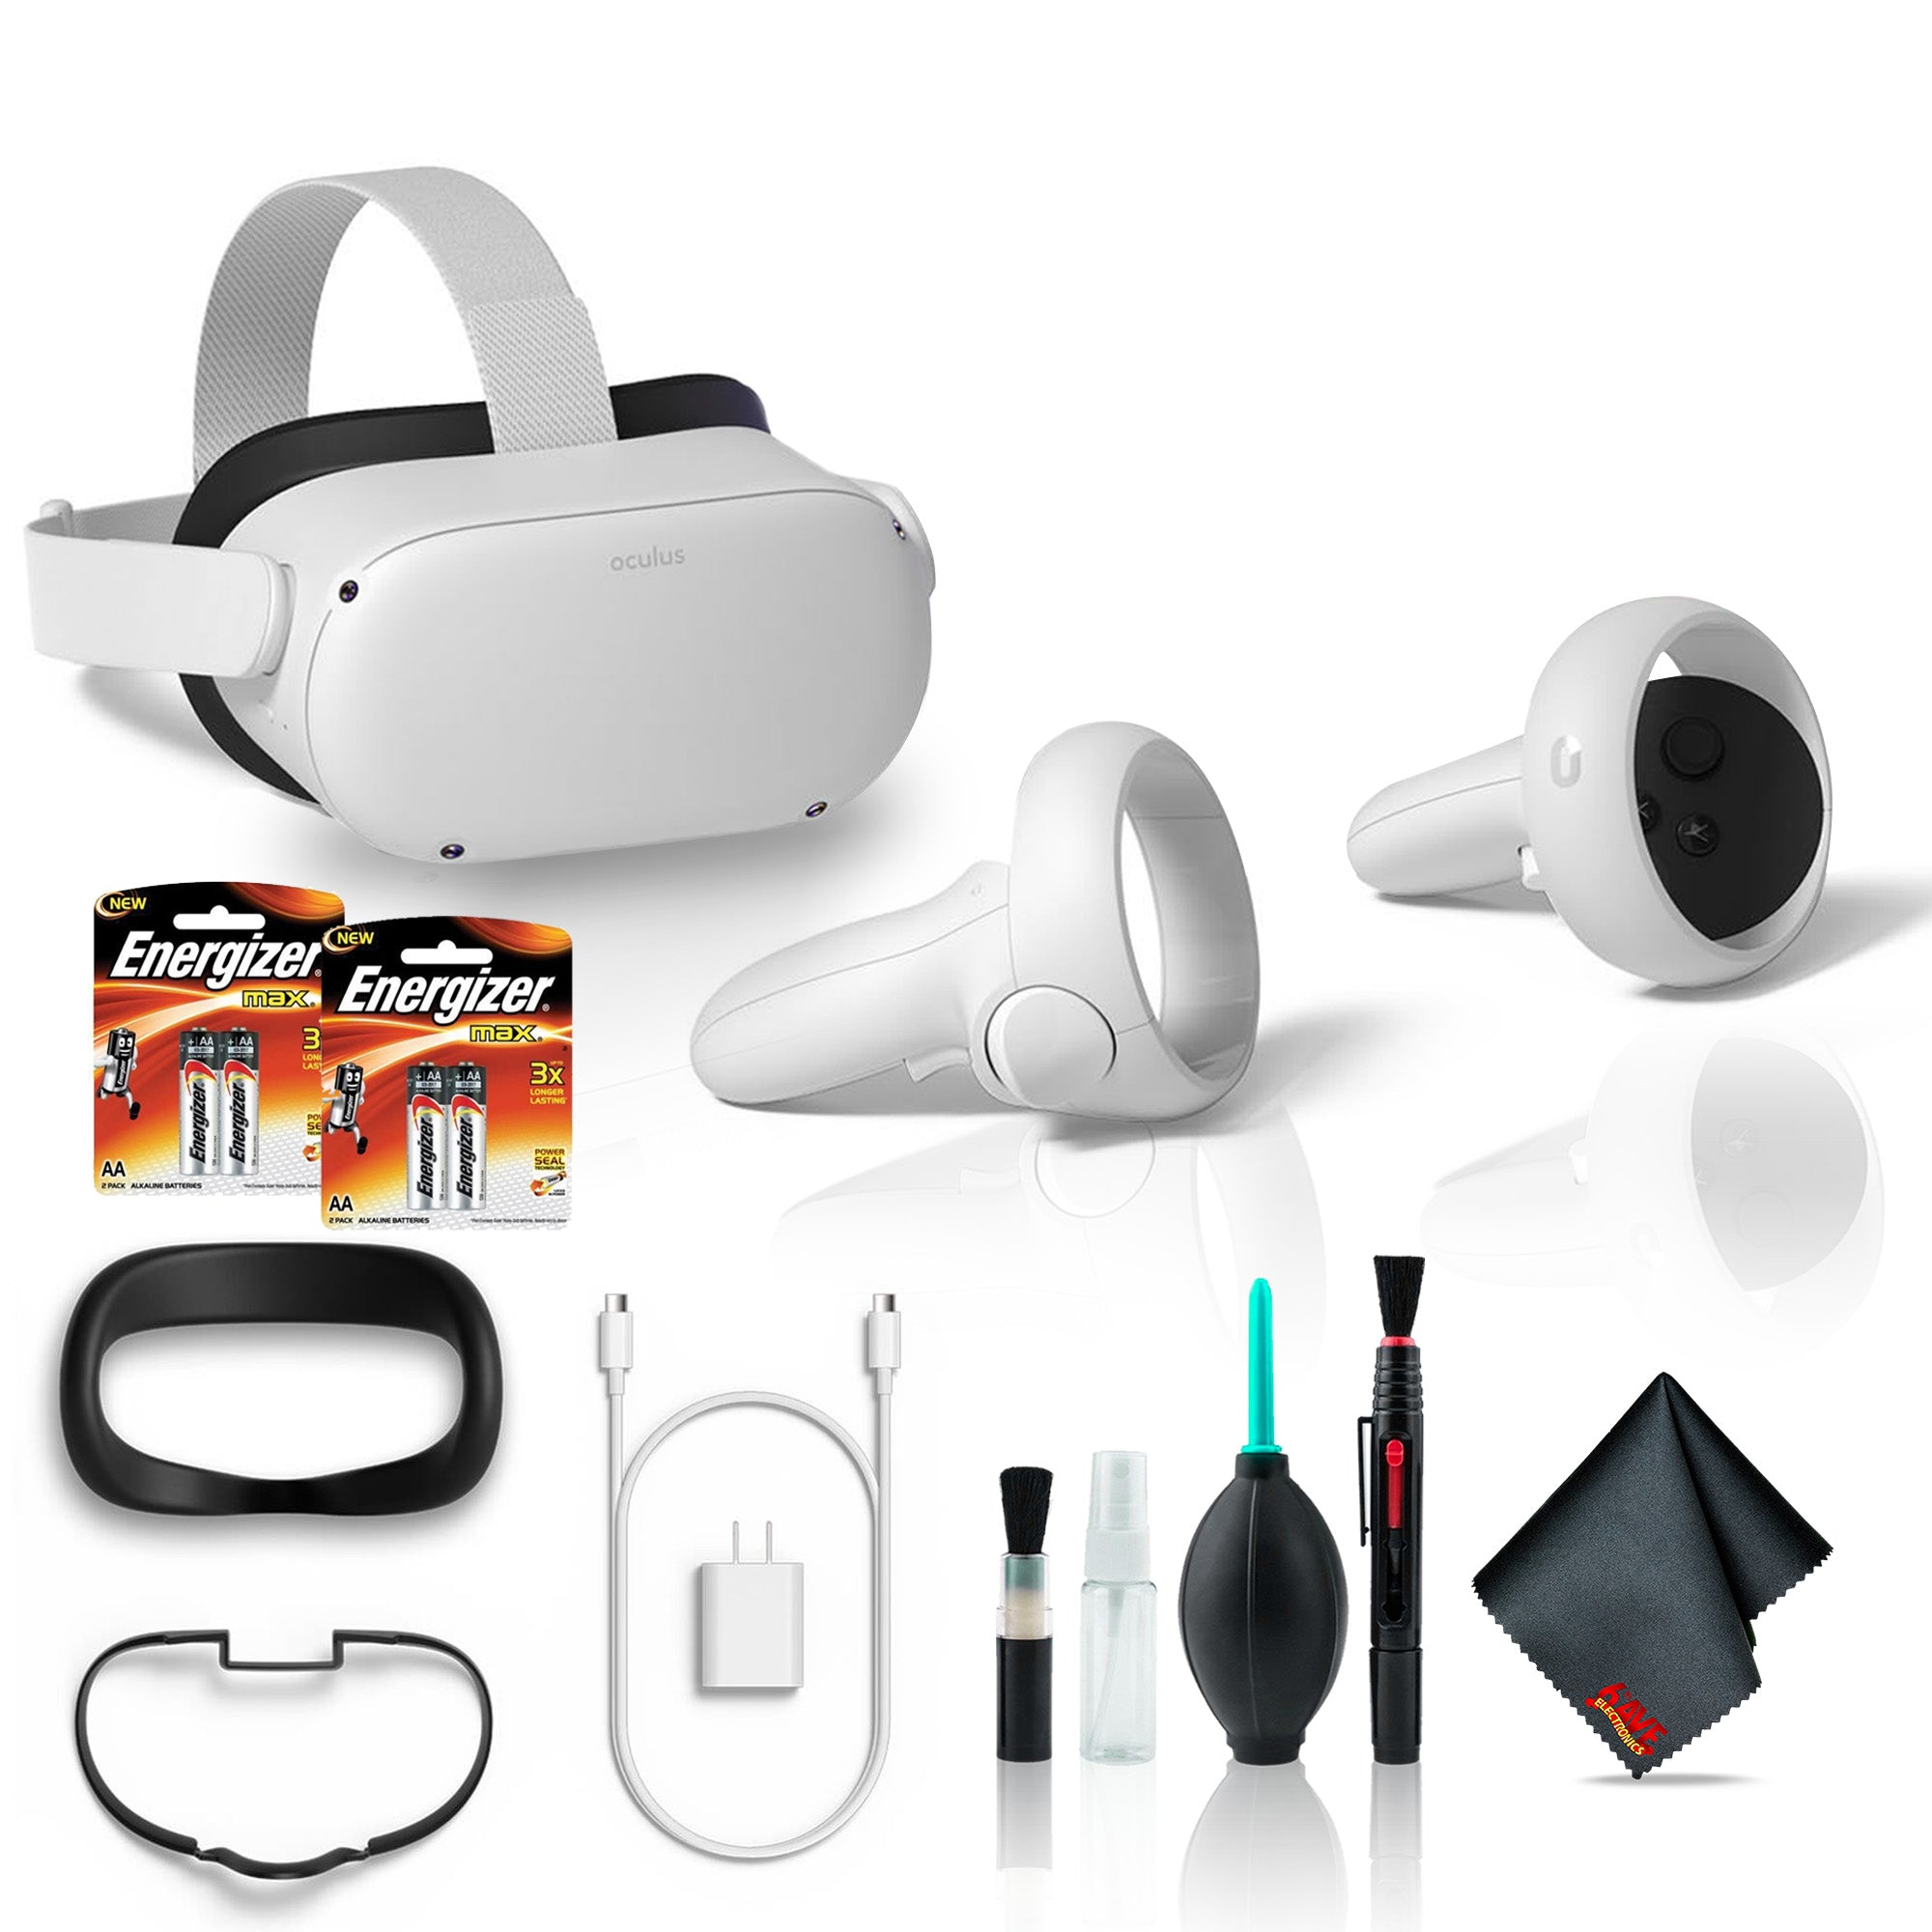 Meta Quest 2 Advanced VR Headset 256GB White Bundle with Extra Batteries and 6Ave Cleaning Kit